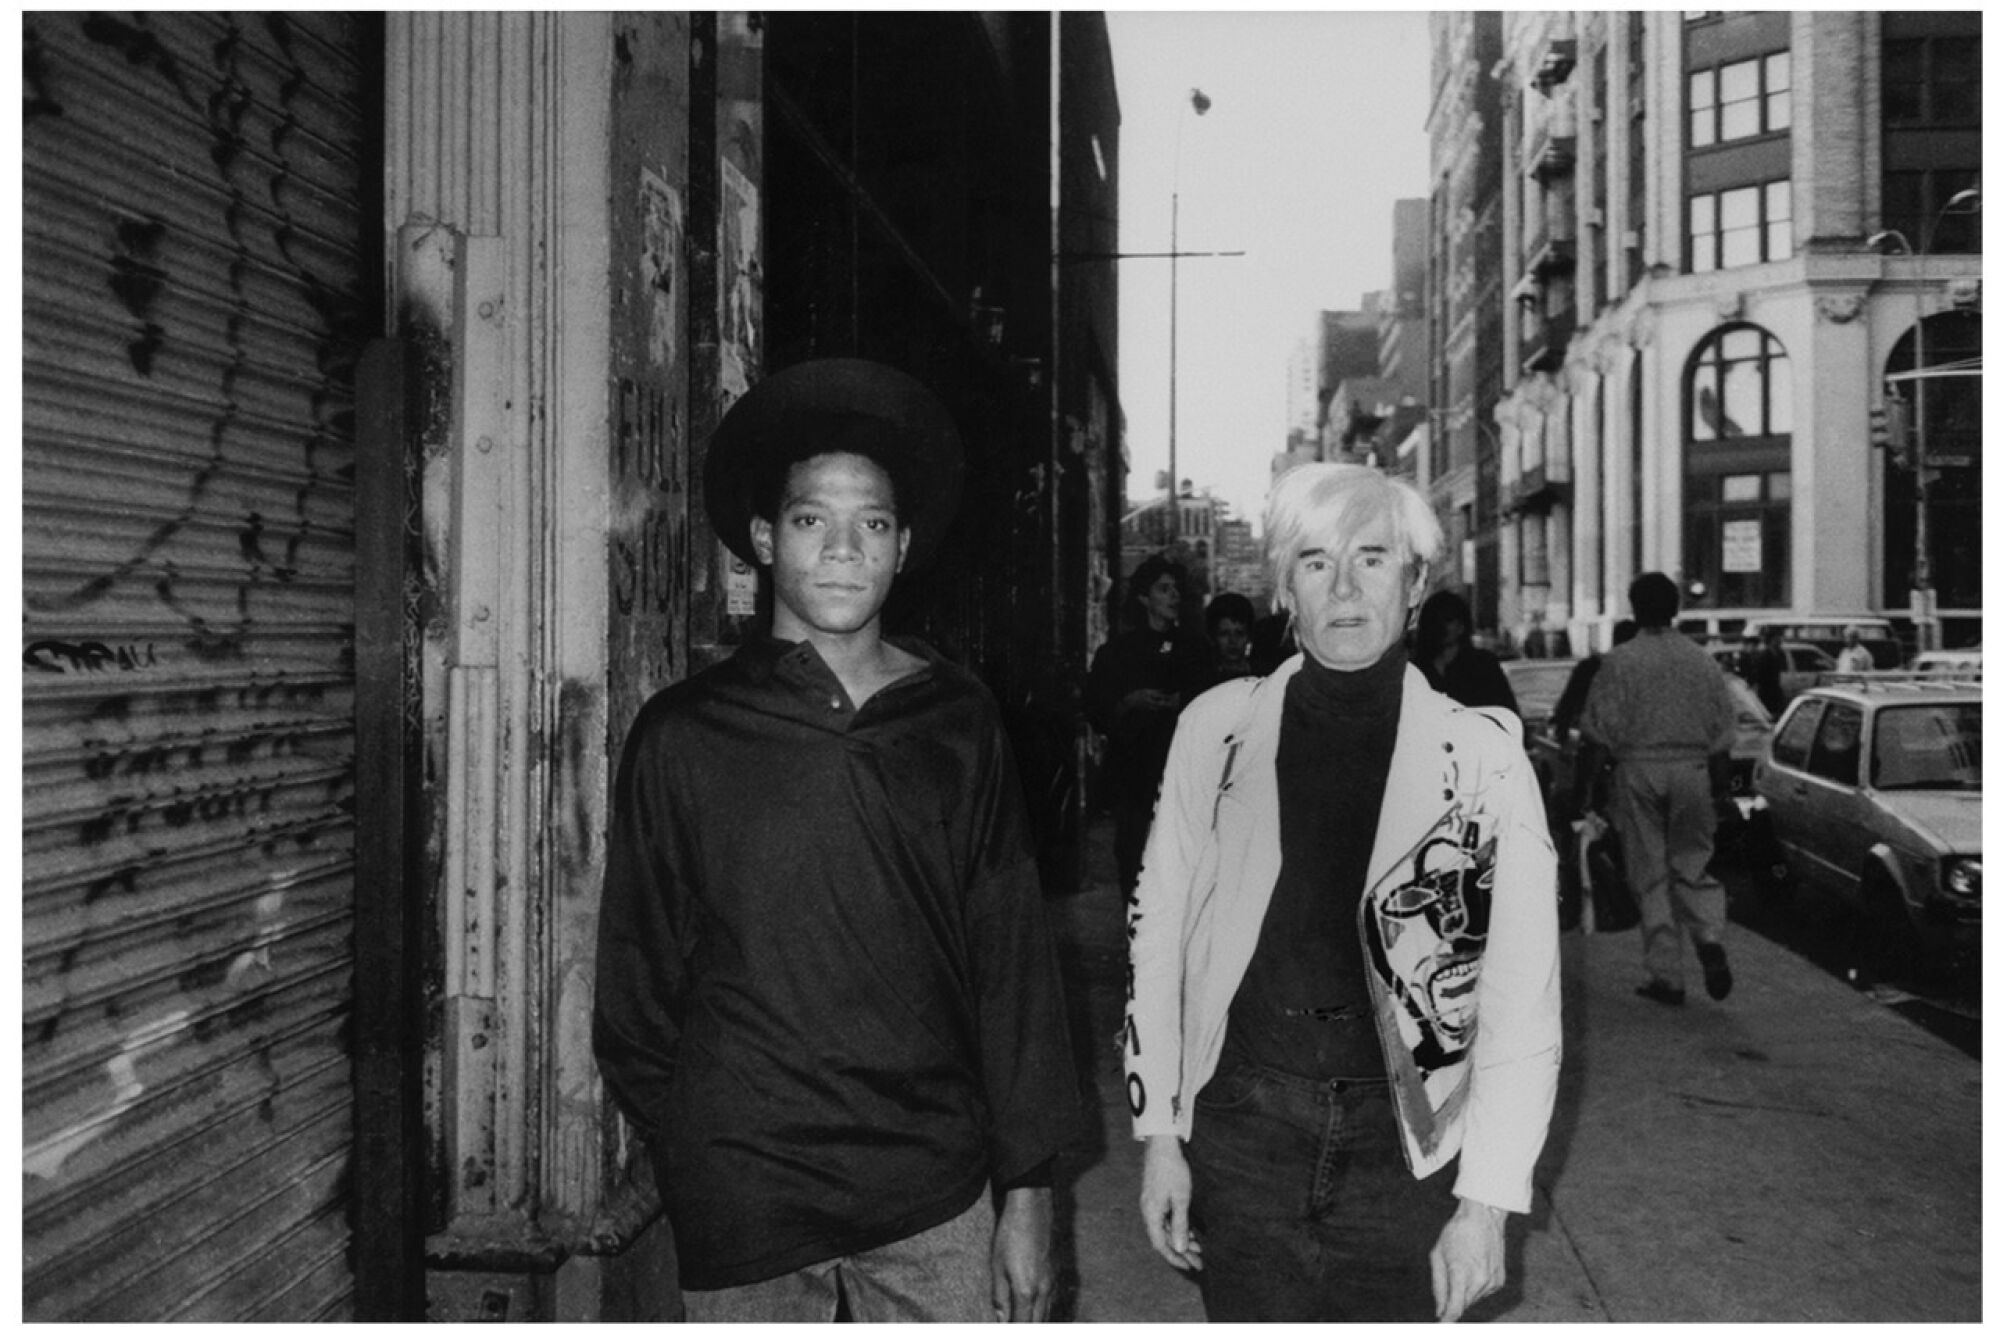 Jean-Michel Basquiat and Andy Warhol in New York City